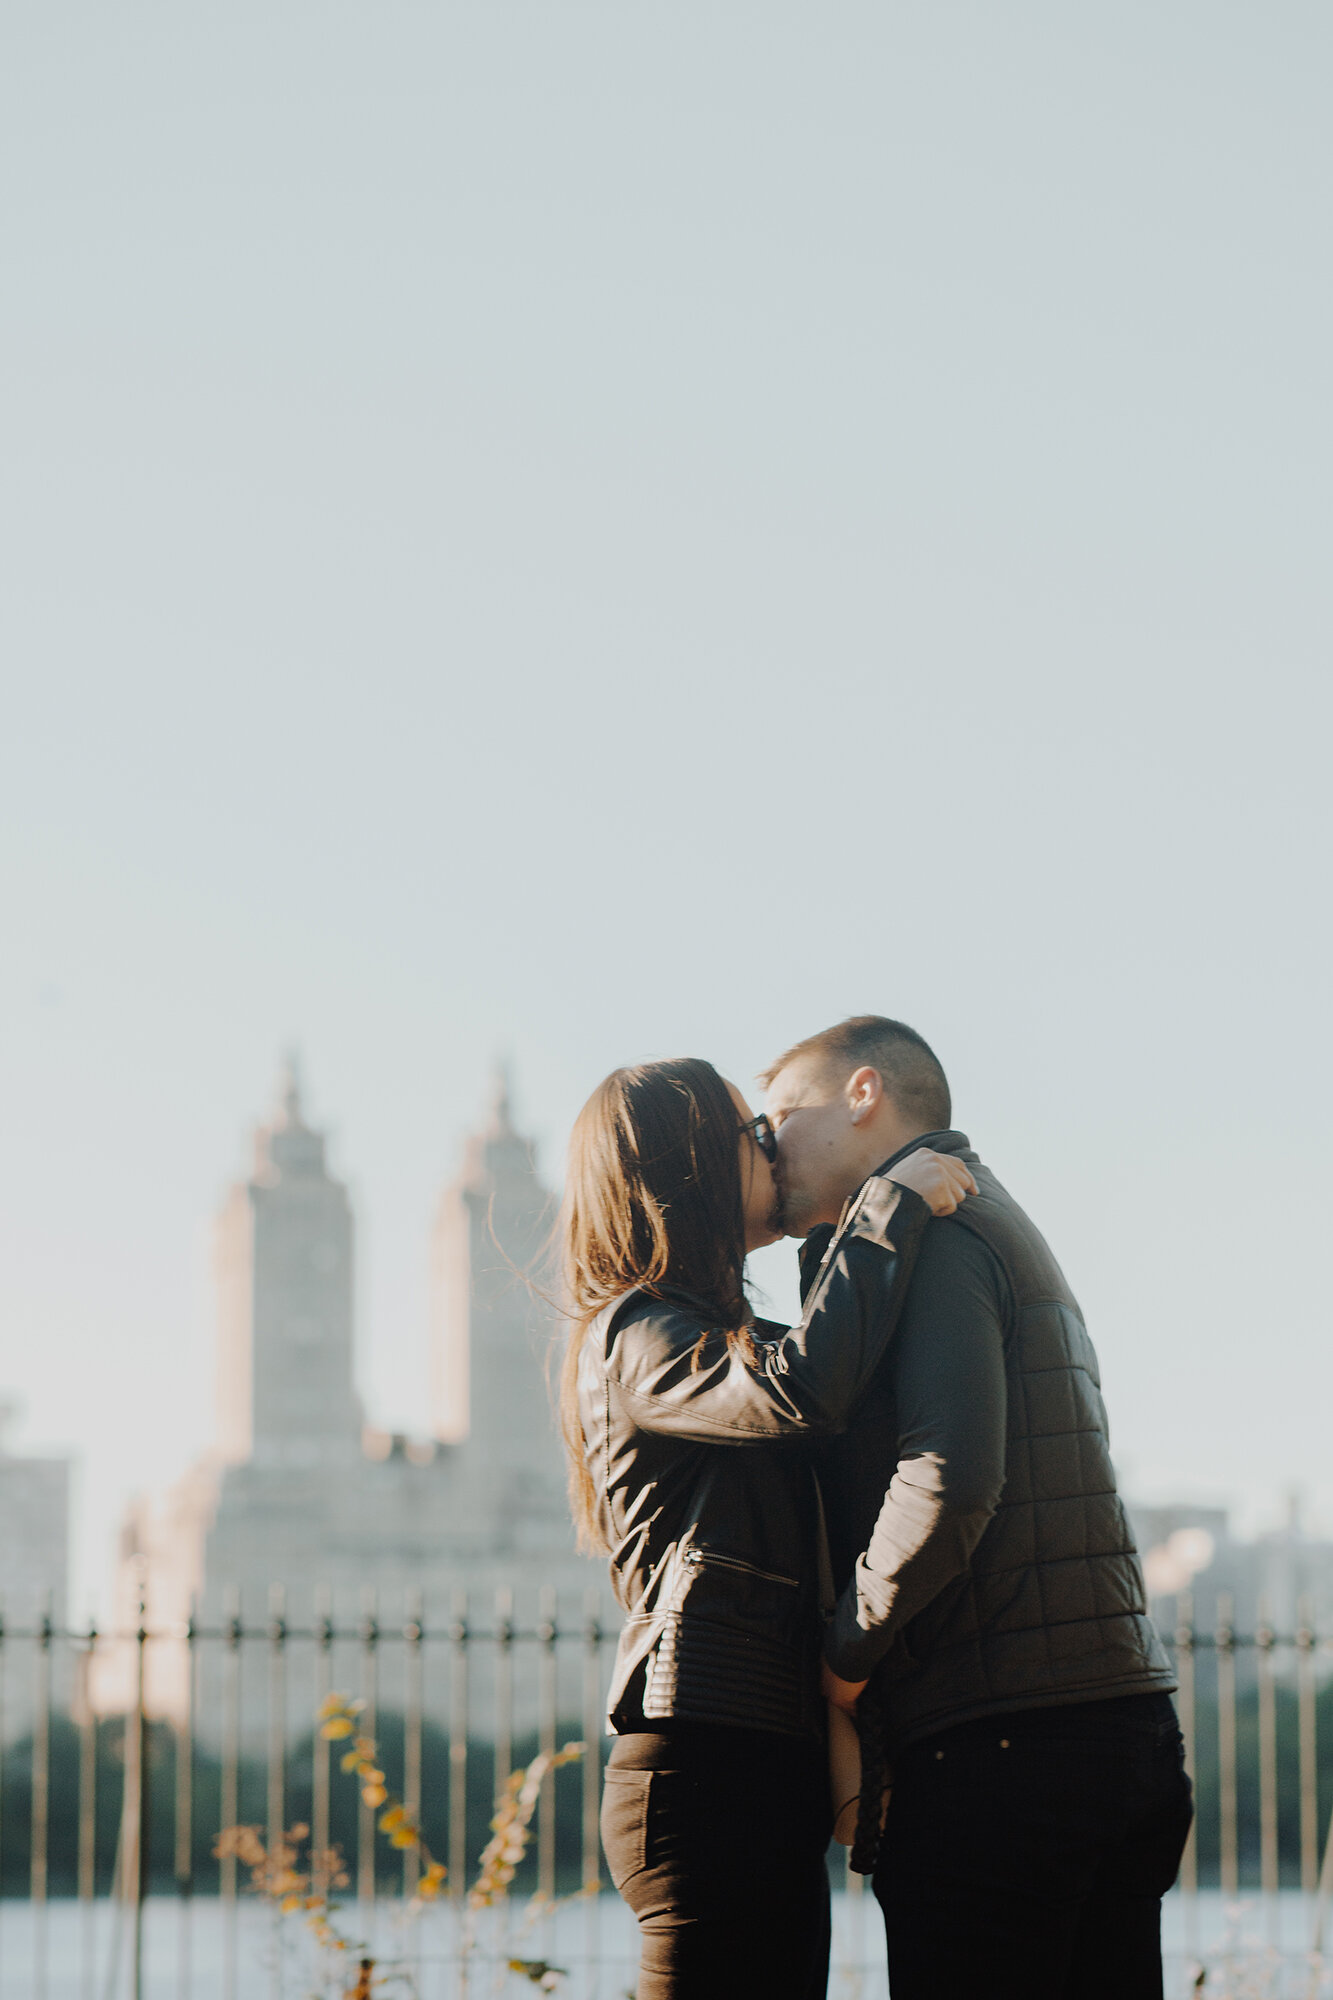 Intimate Secret Proposal Photos in Central Park NYC